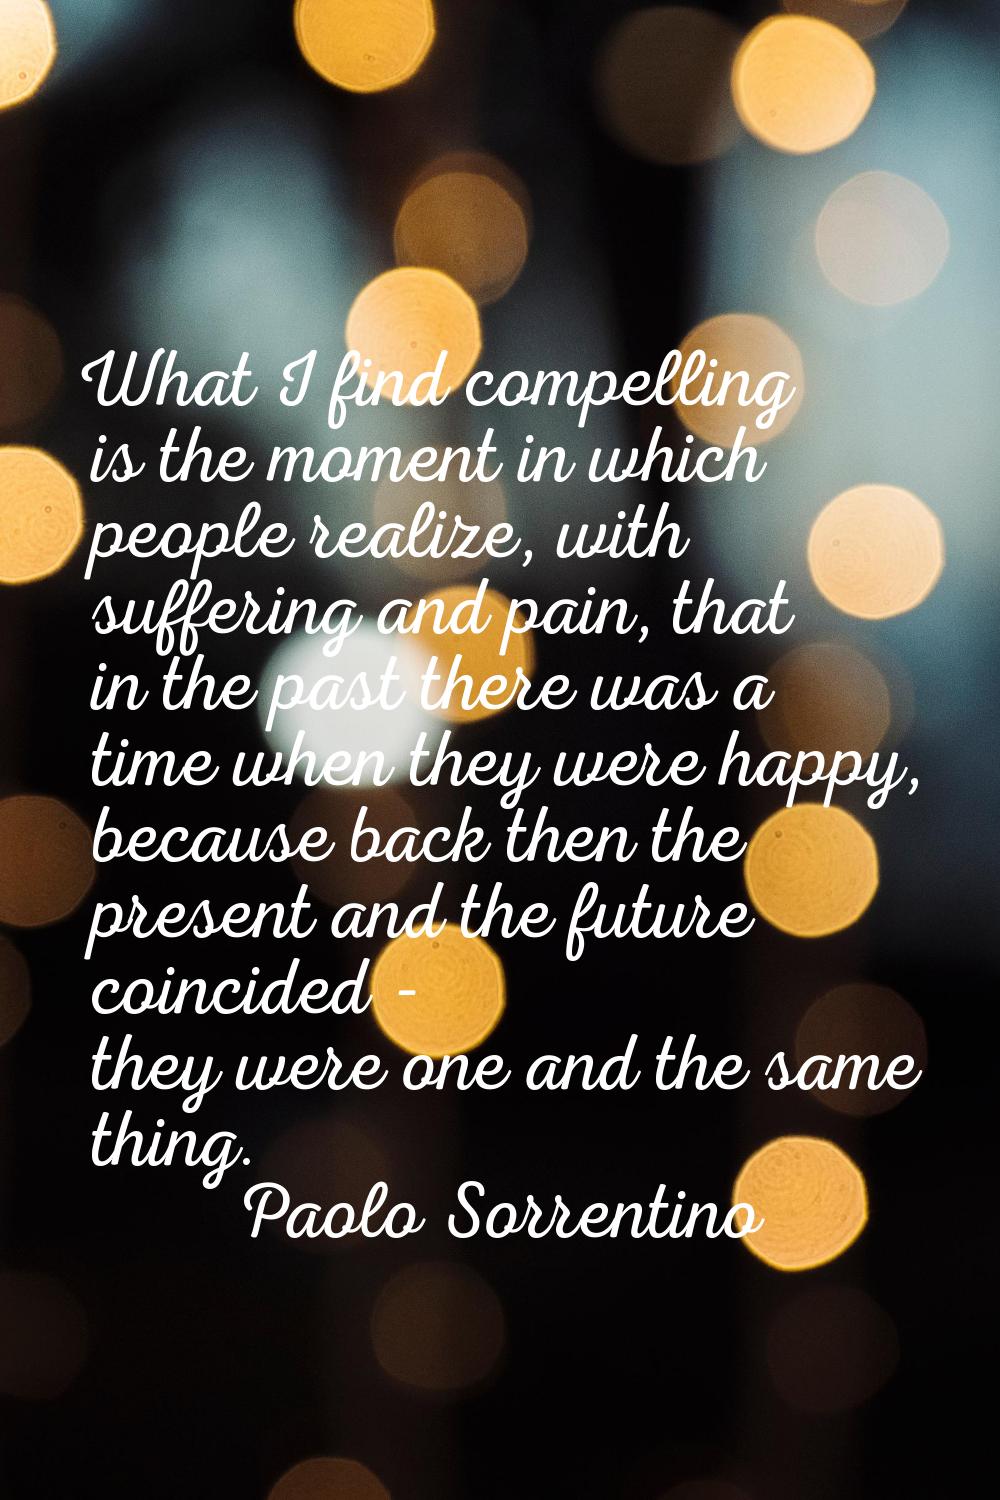 What I find compelling is the moment in which people realize, with suffering and pain, that in the 